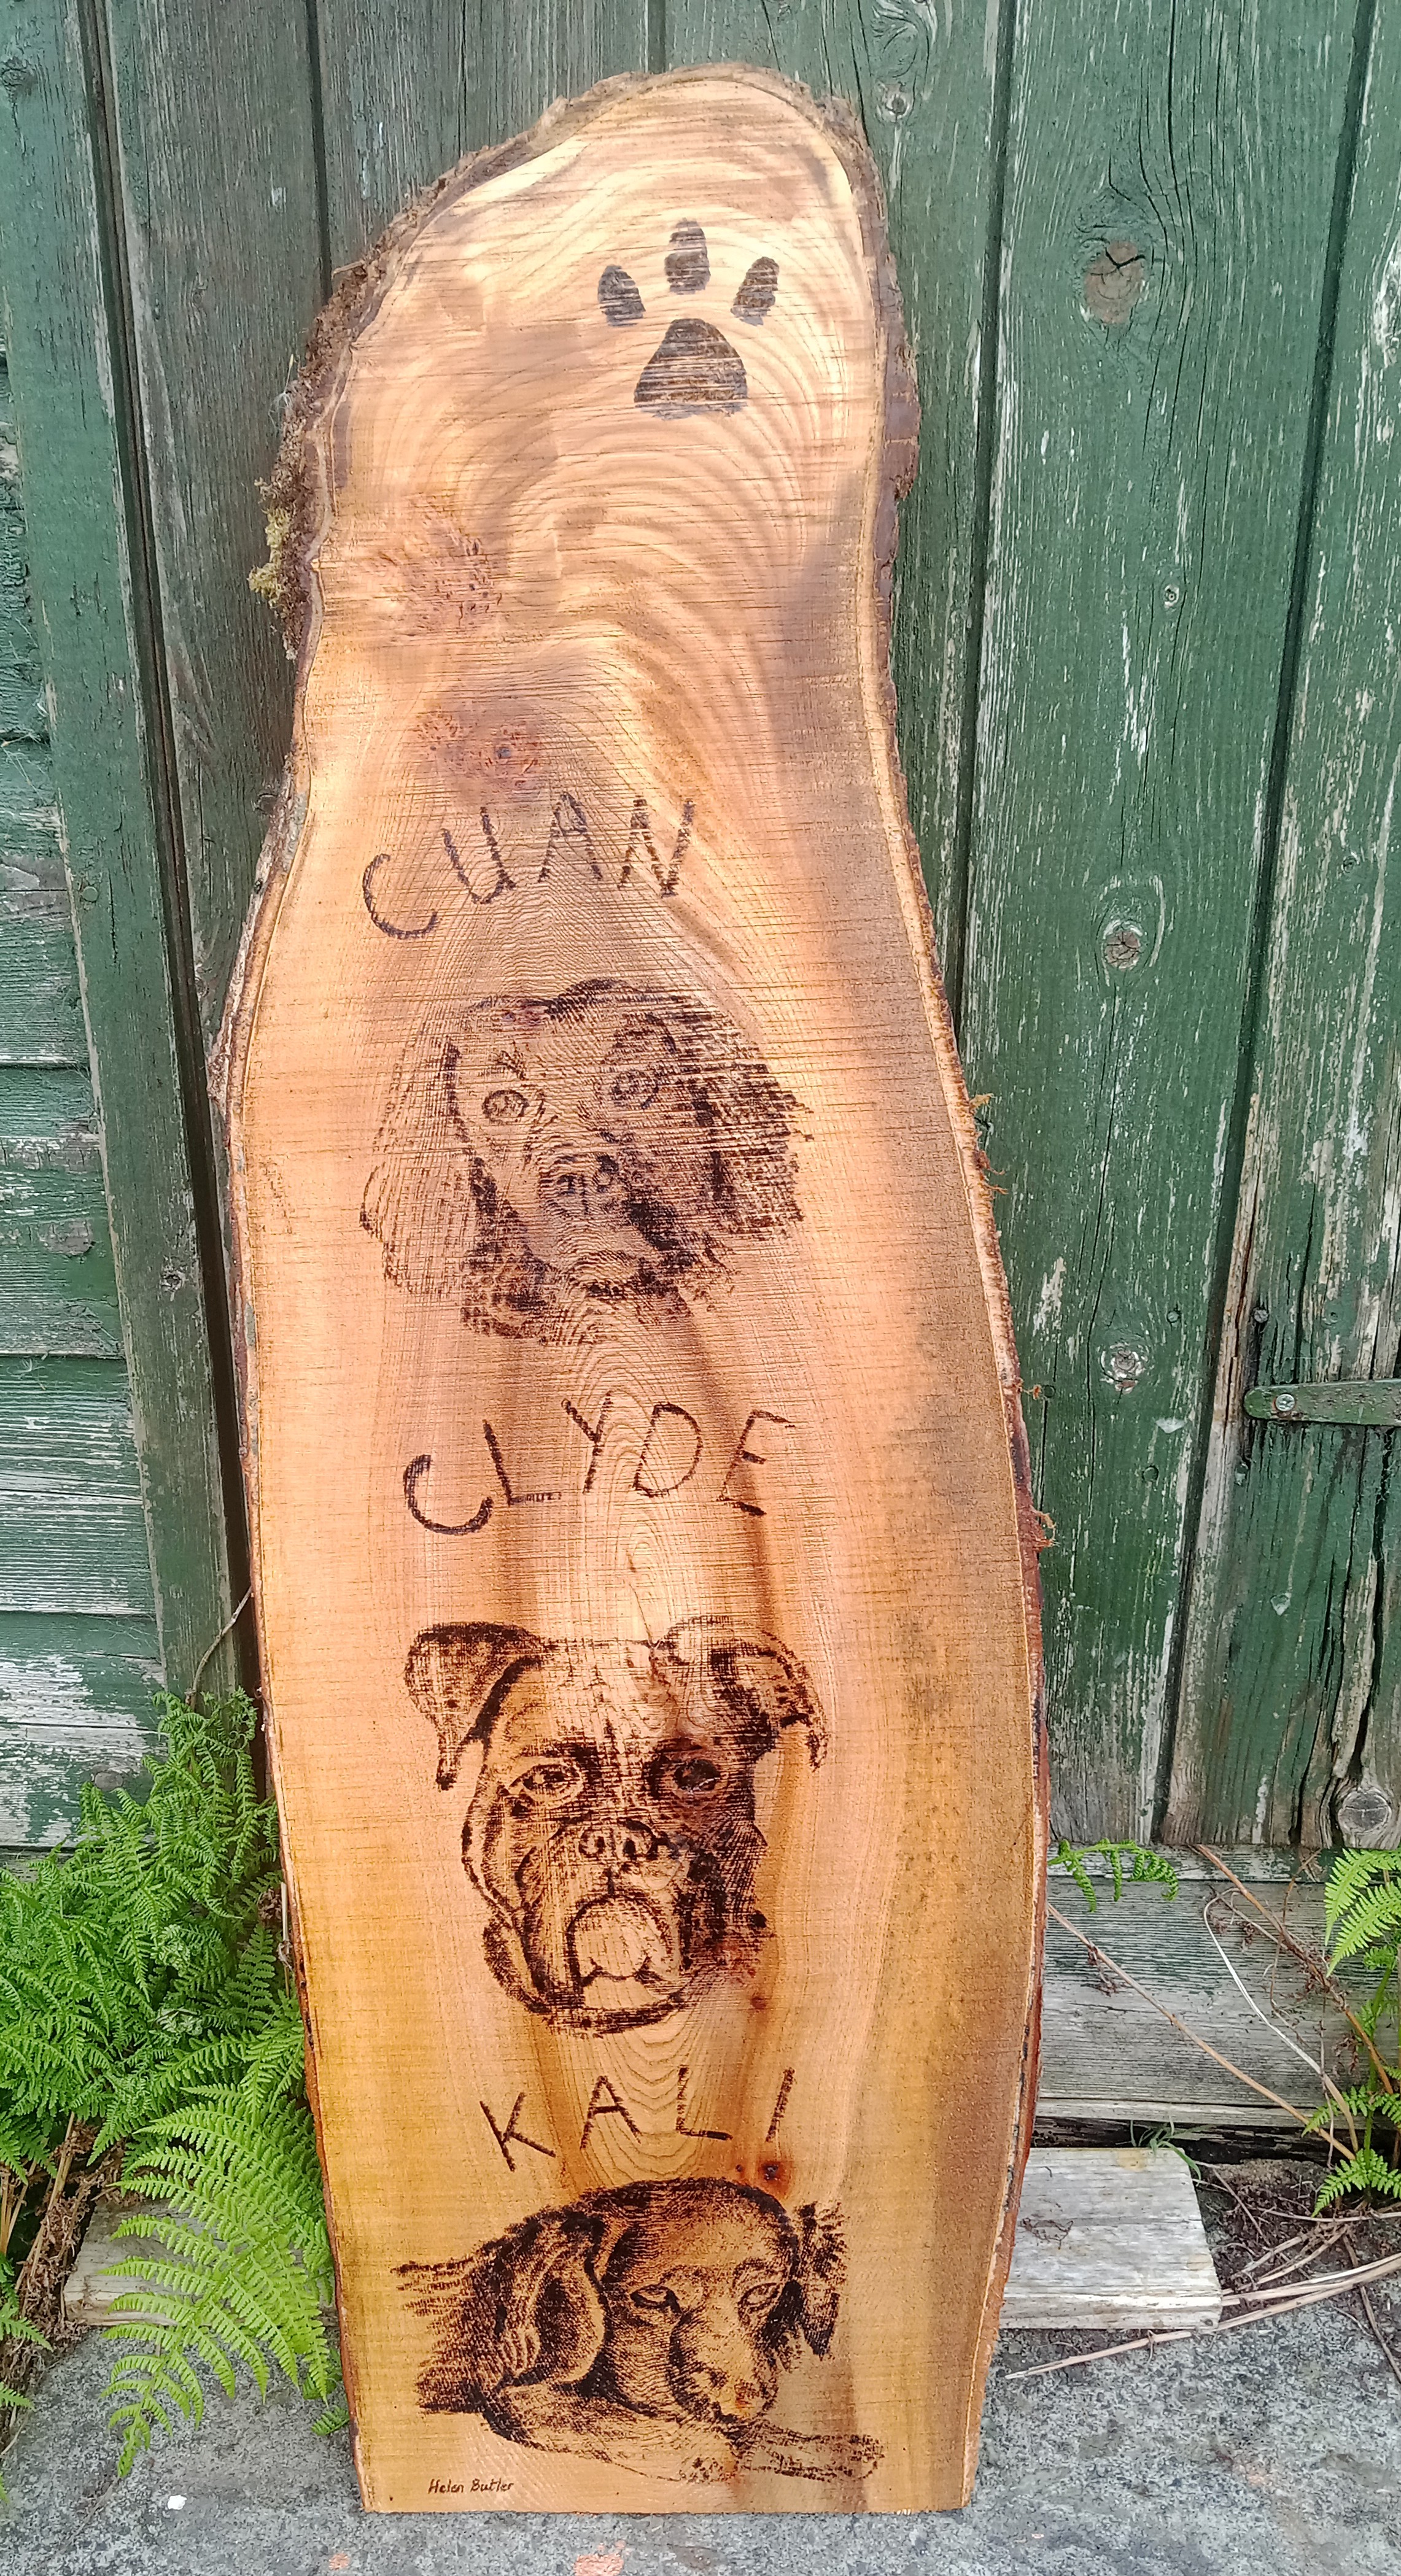 3 dogs pyrography